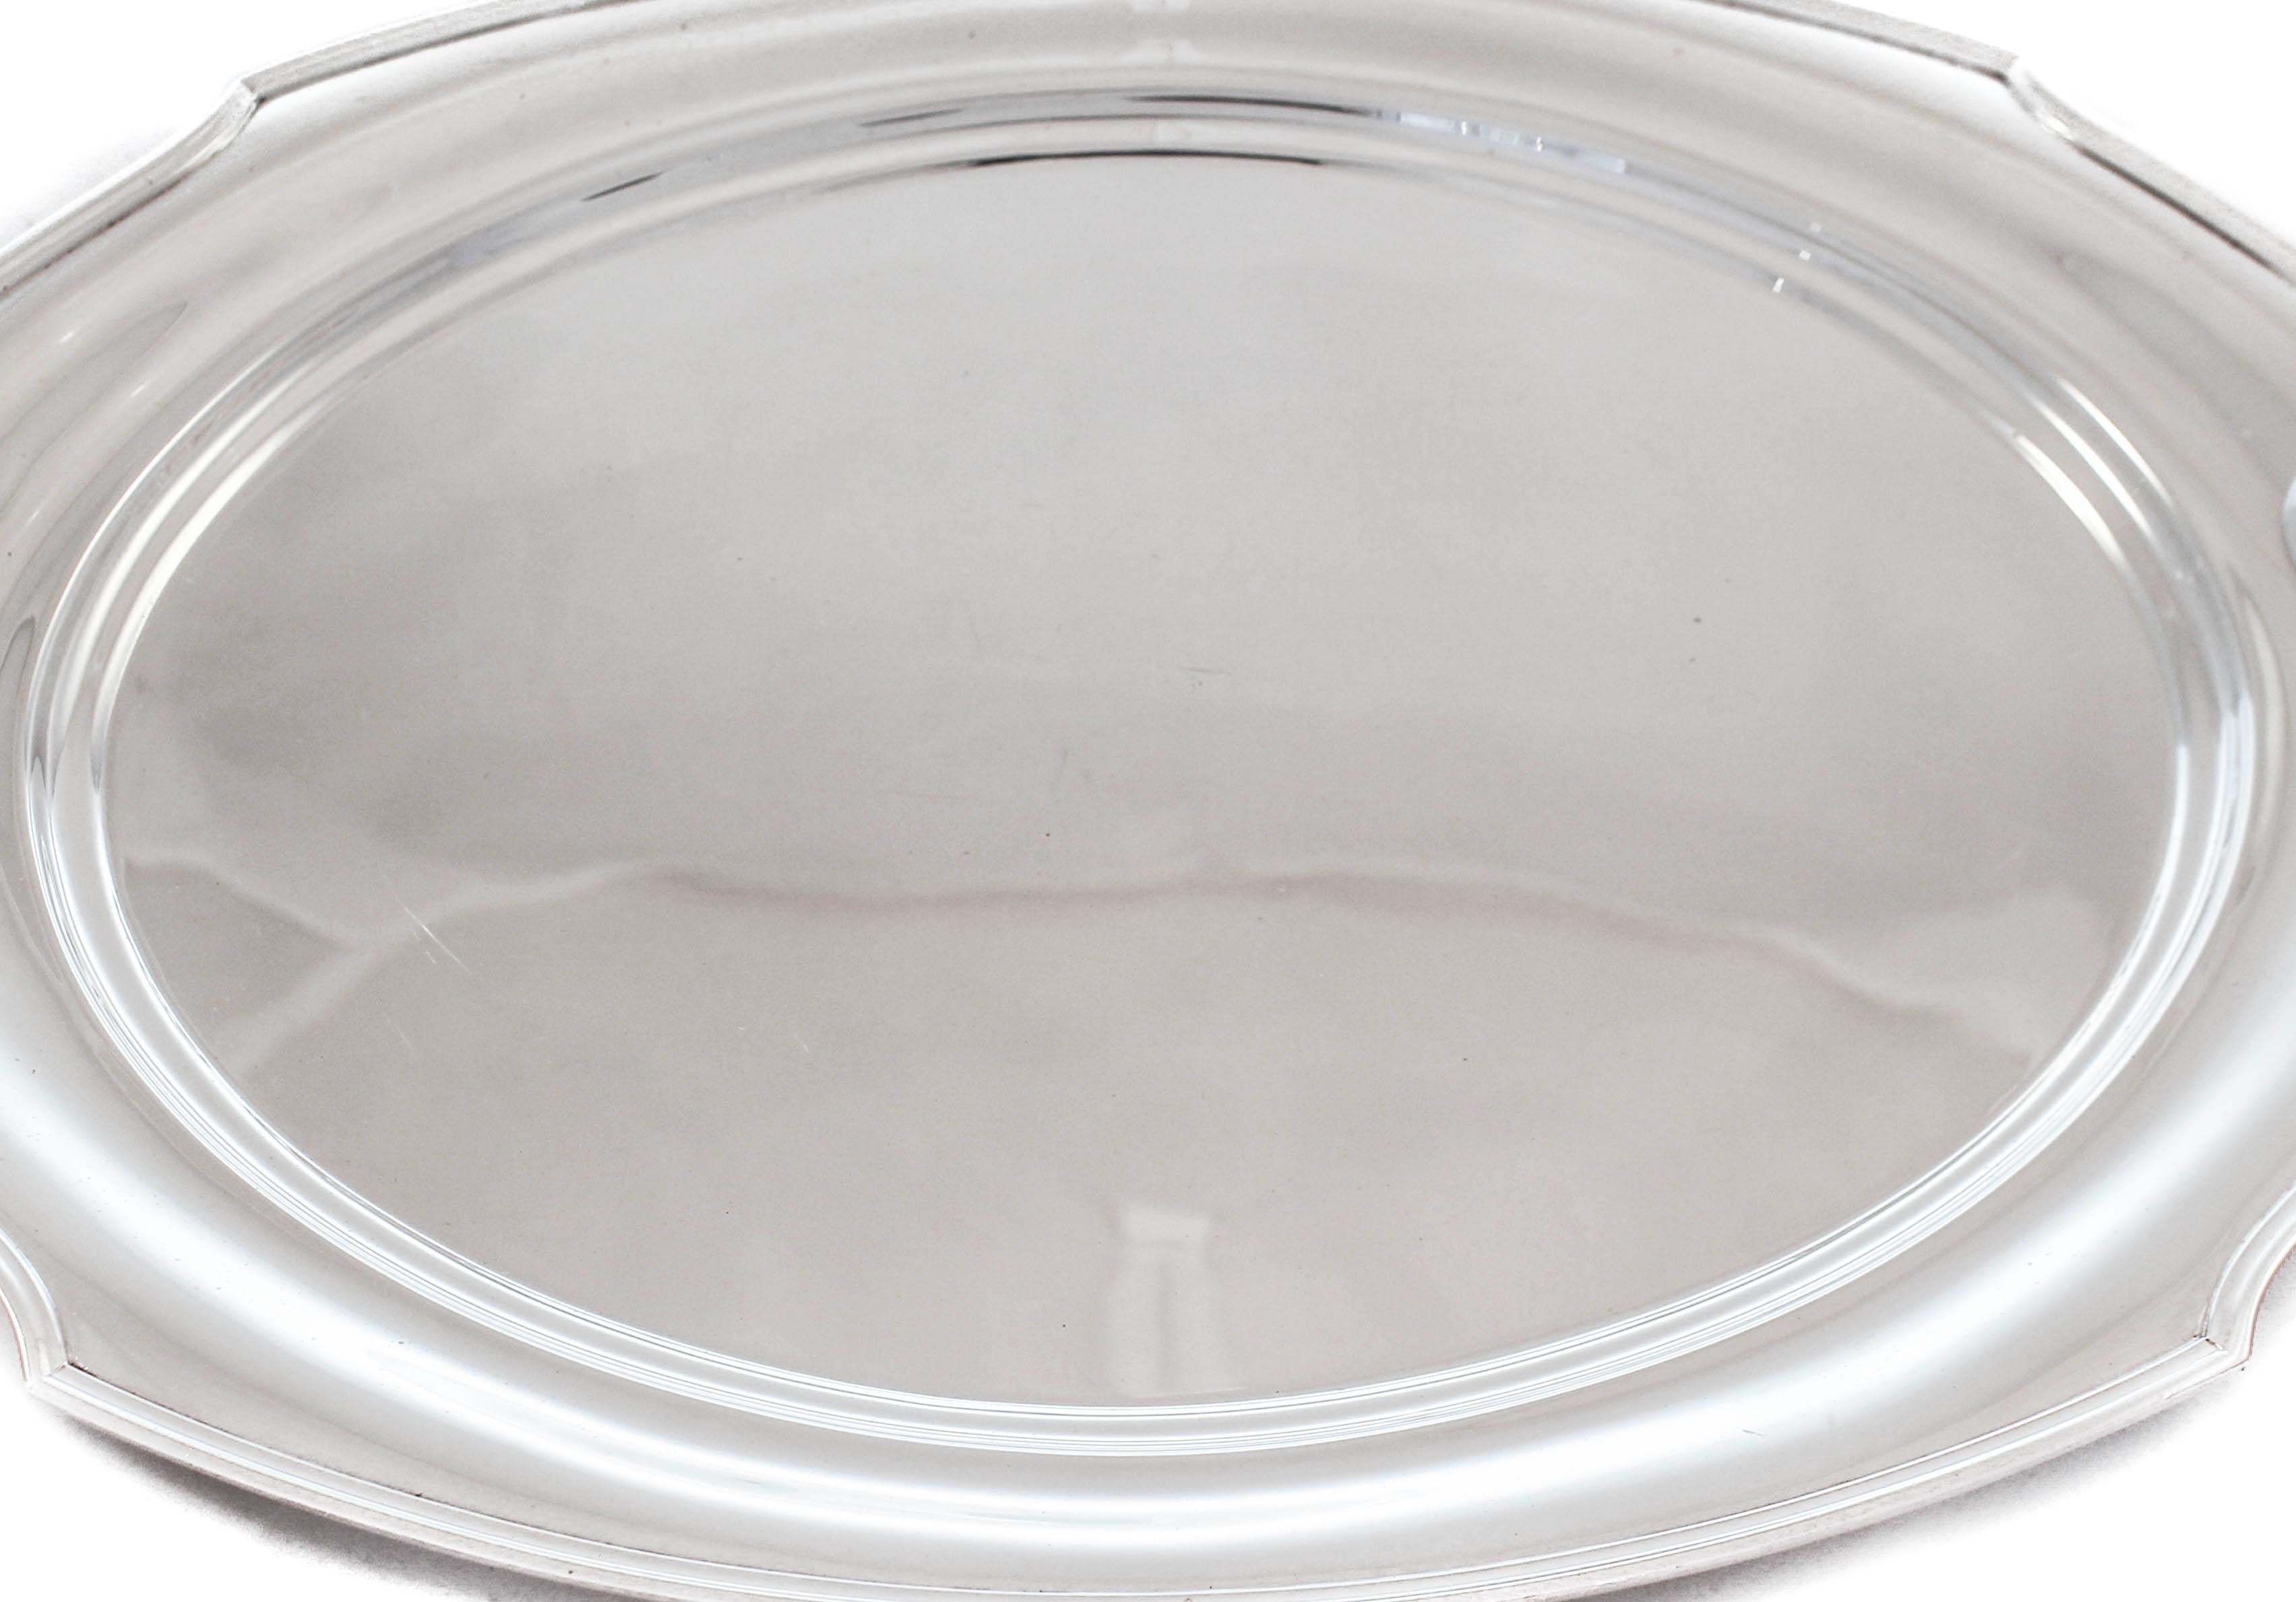 We are happy to offer this sterling silver tray made by International Silver of Meriden, Connecticut.
Manufactured during WWII, it reflects the austerity of the time. No fancy designs or etchings, just an understated and unadorned look. It has a